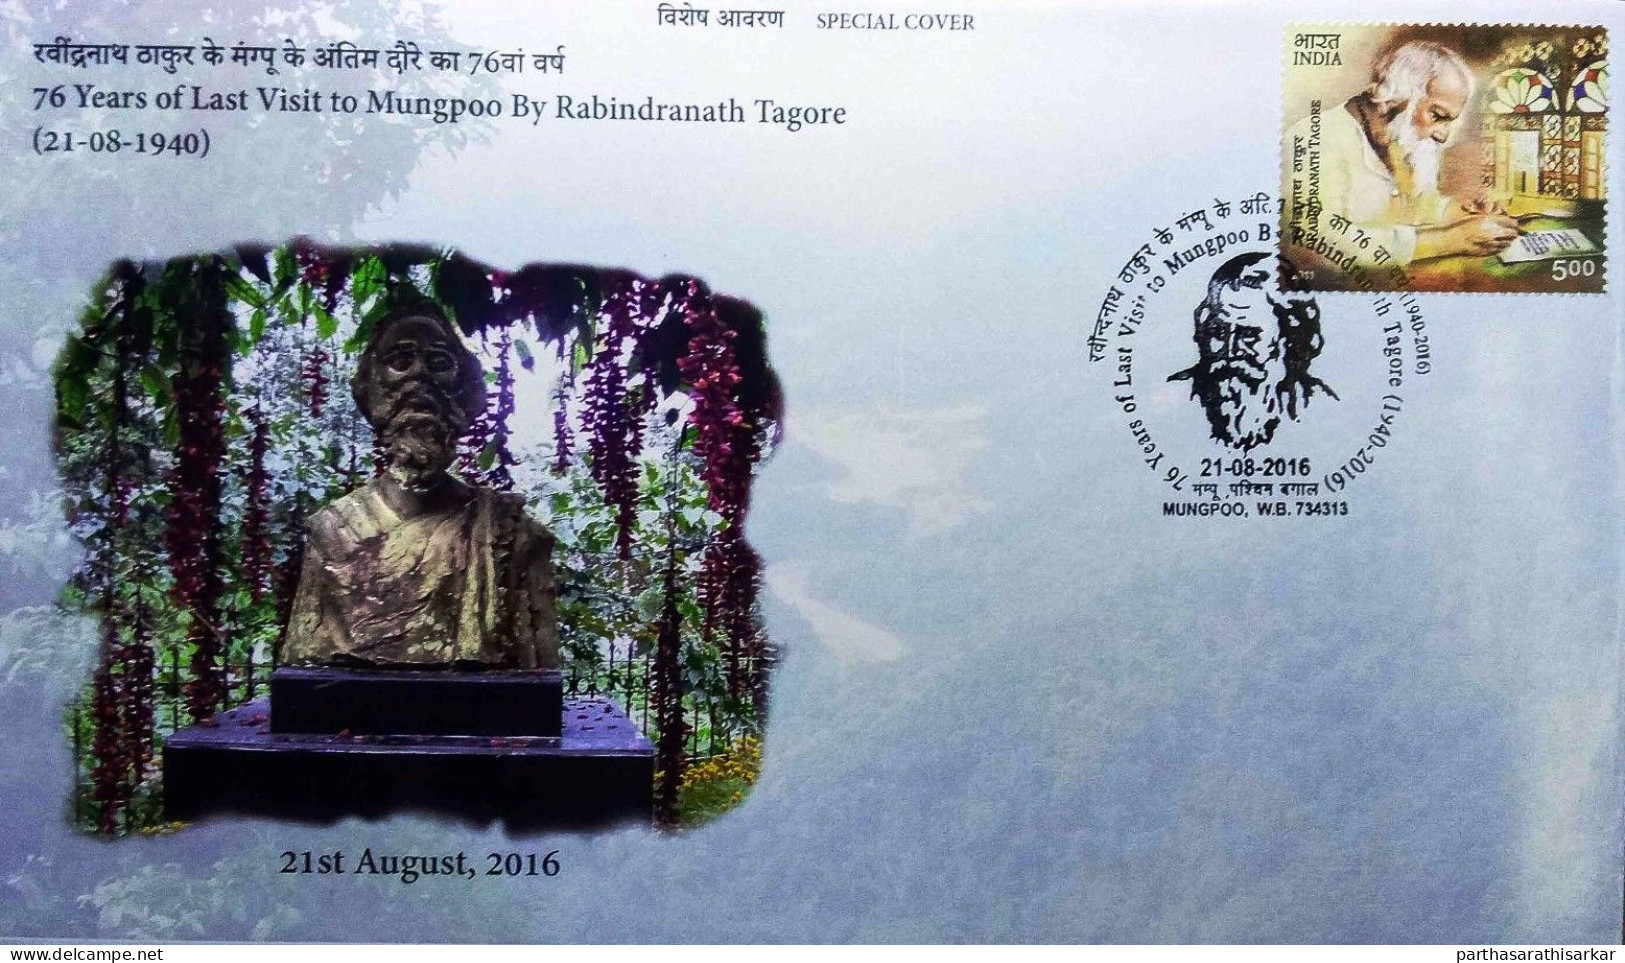 INDIA 2016 76 YEARS OF LAST VISIT TO MUNGPOO BY RABINDRANATH TAGORE LIMITED EDITION EMBOSSED SPECIAL COVER USED RARE - Covers & Documents